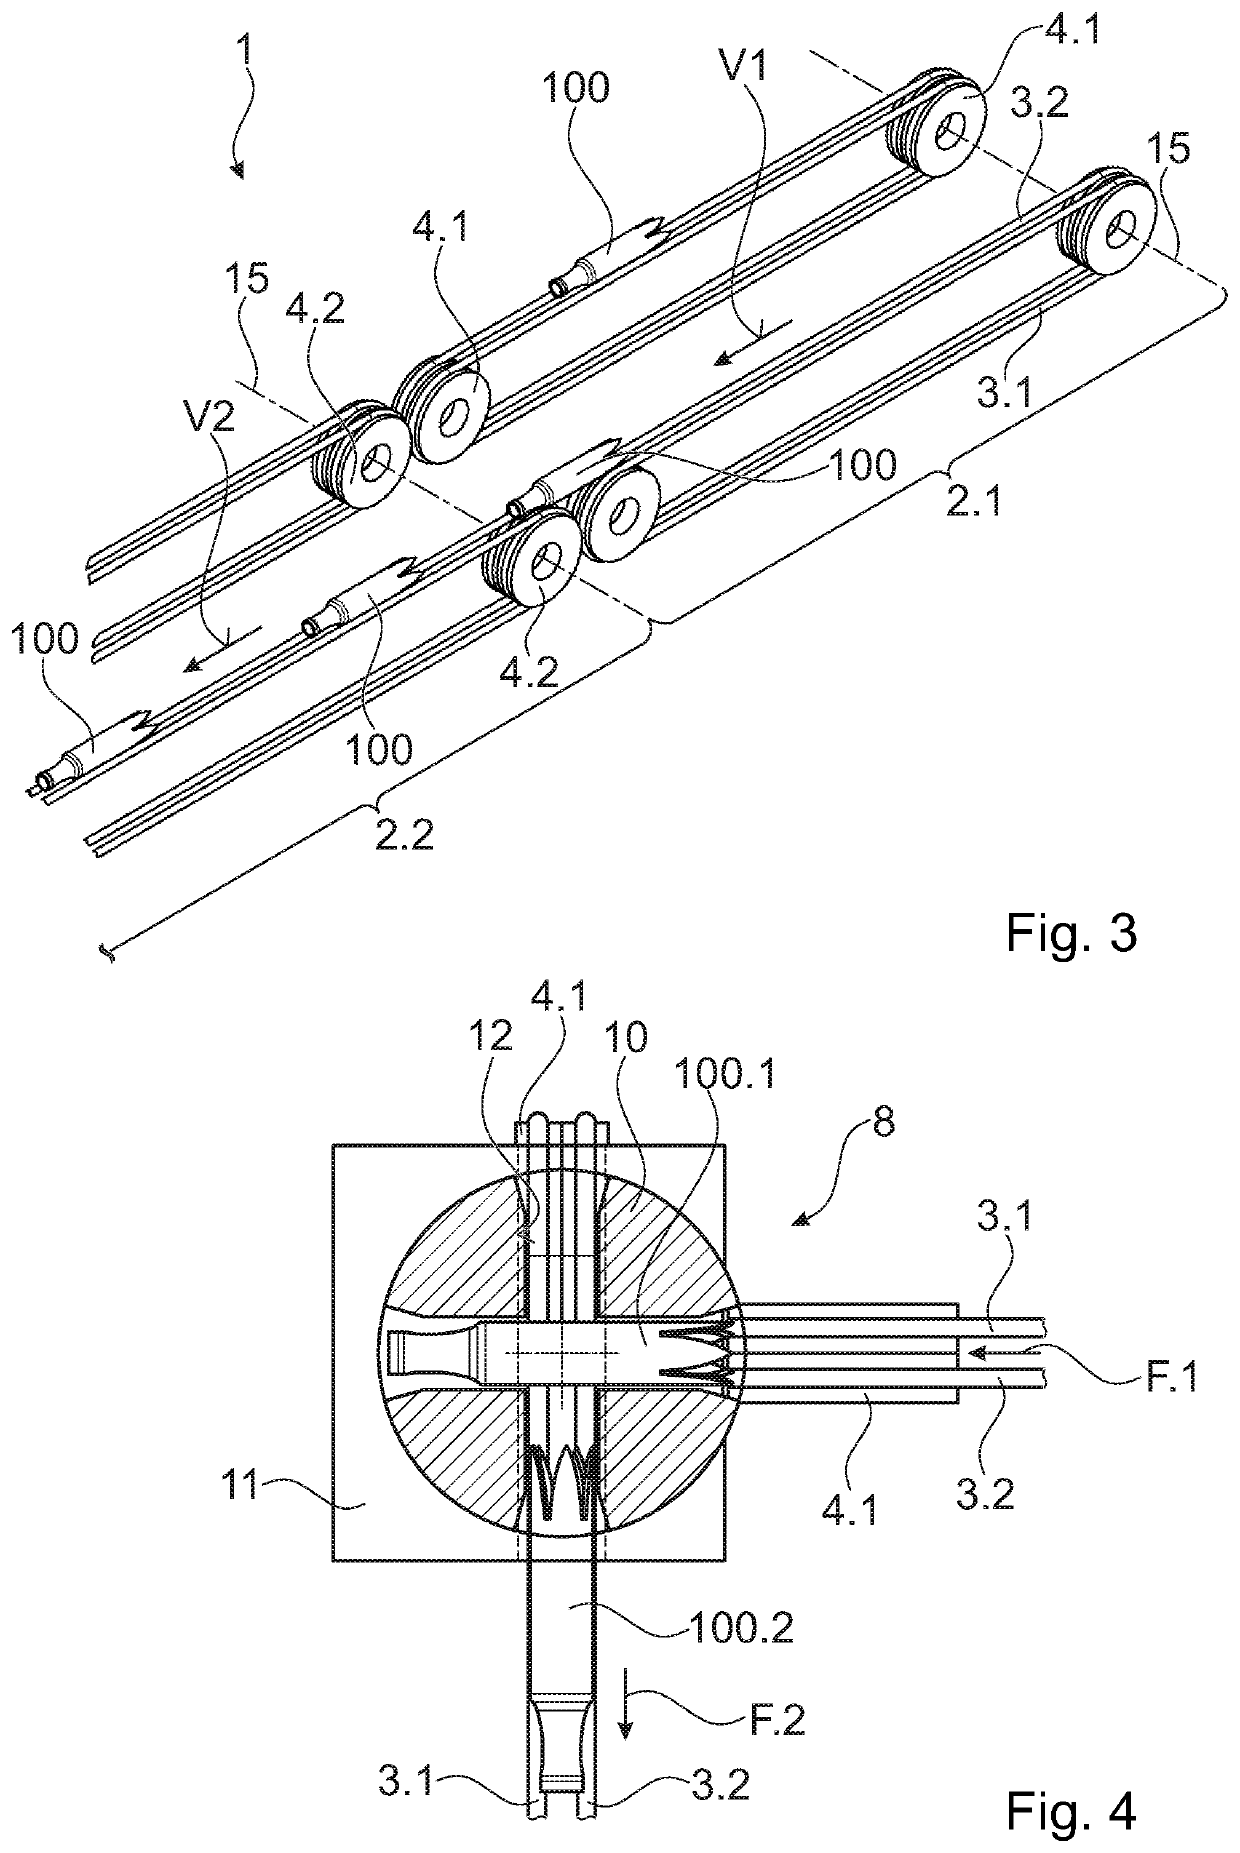 Conveying apparatus and method of conveying tampon applicators